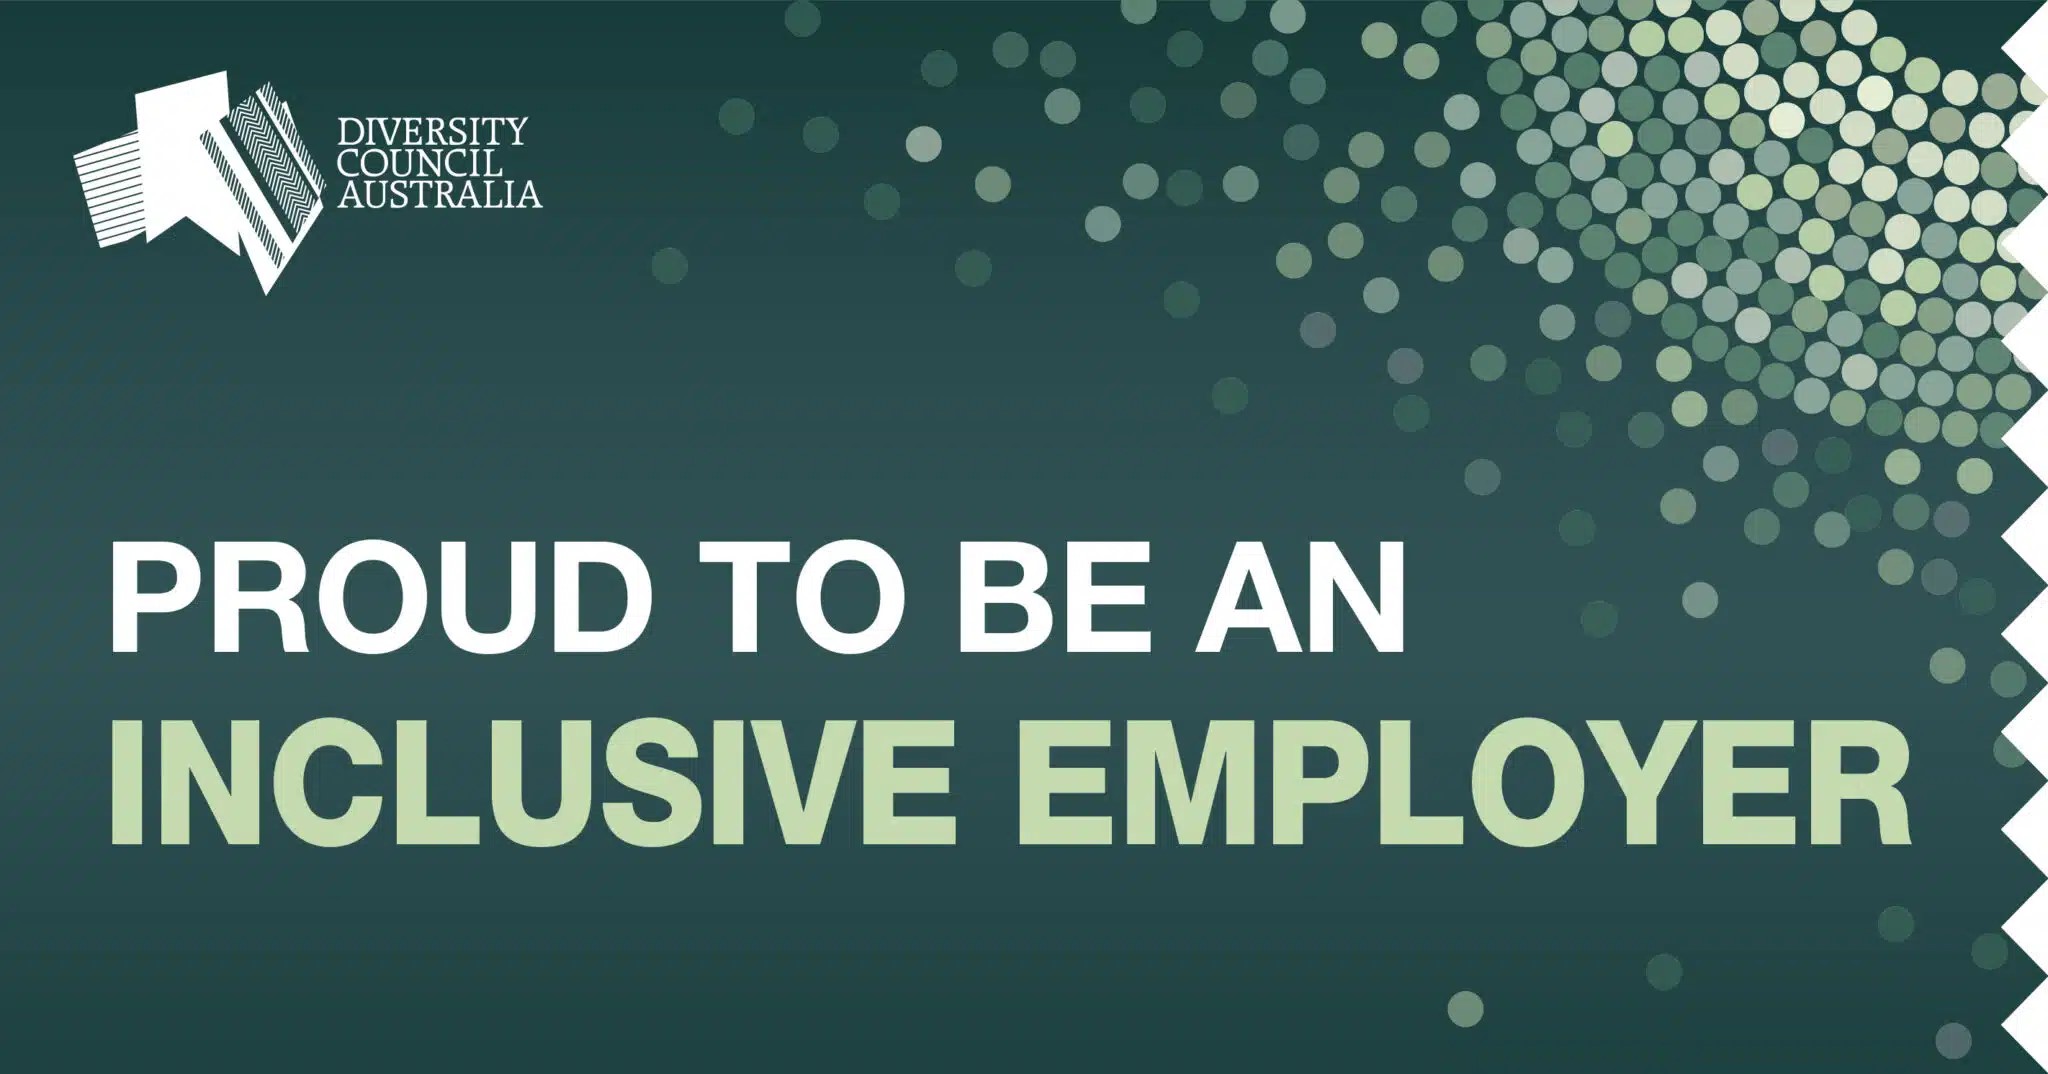  HIF named Inclusive Employer by Diversity Council Australia 